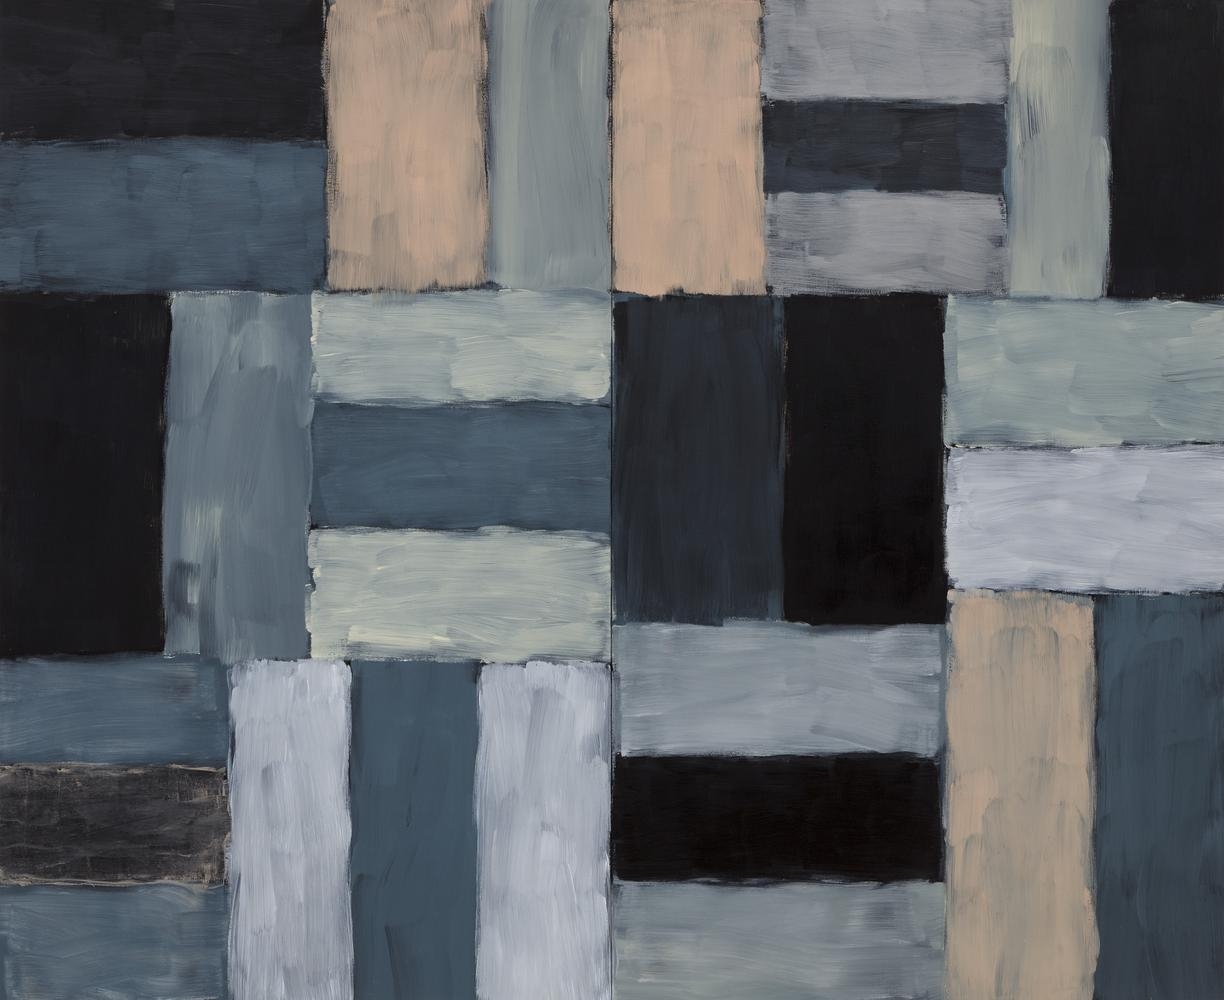 Sean Scully
Wall of Light Desert Night
1999
oil on linen
108 x 132 inches (274.3 x 335.3 cm)
Modern Art Museum of Fort Worth